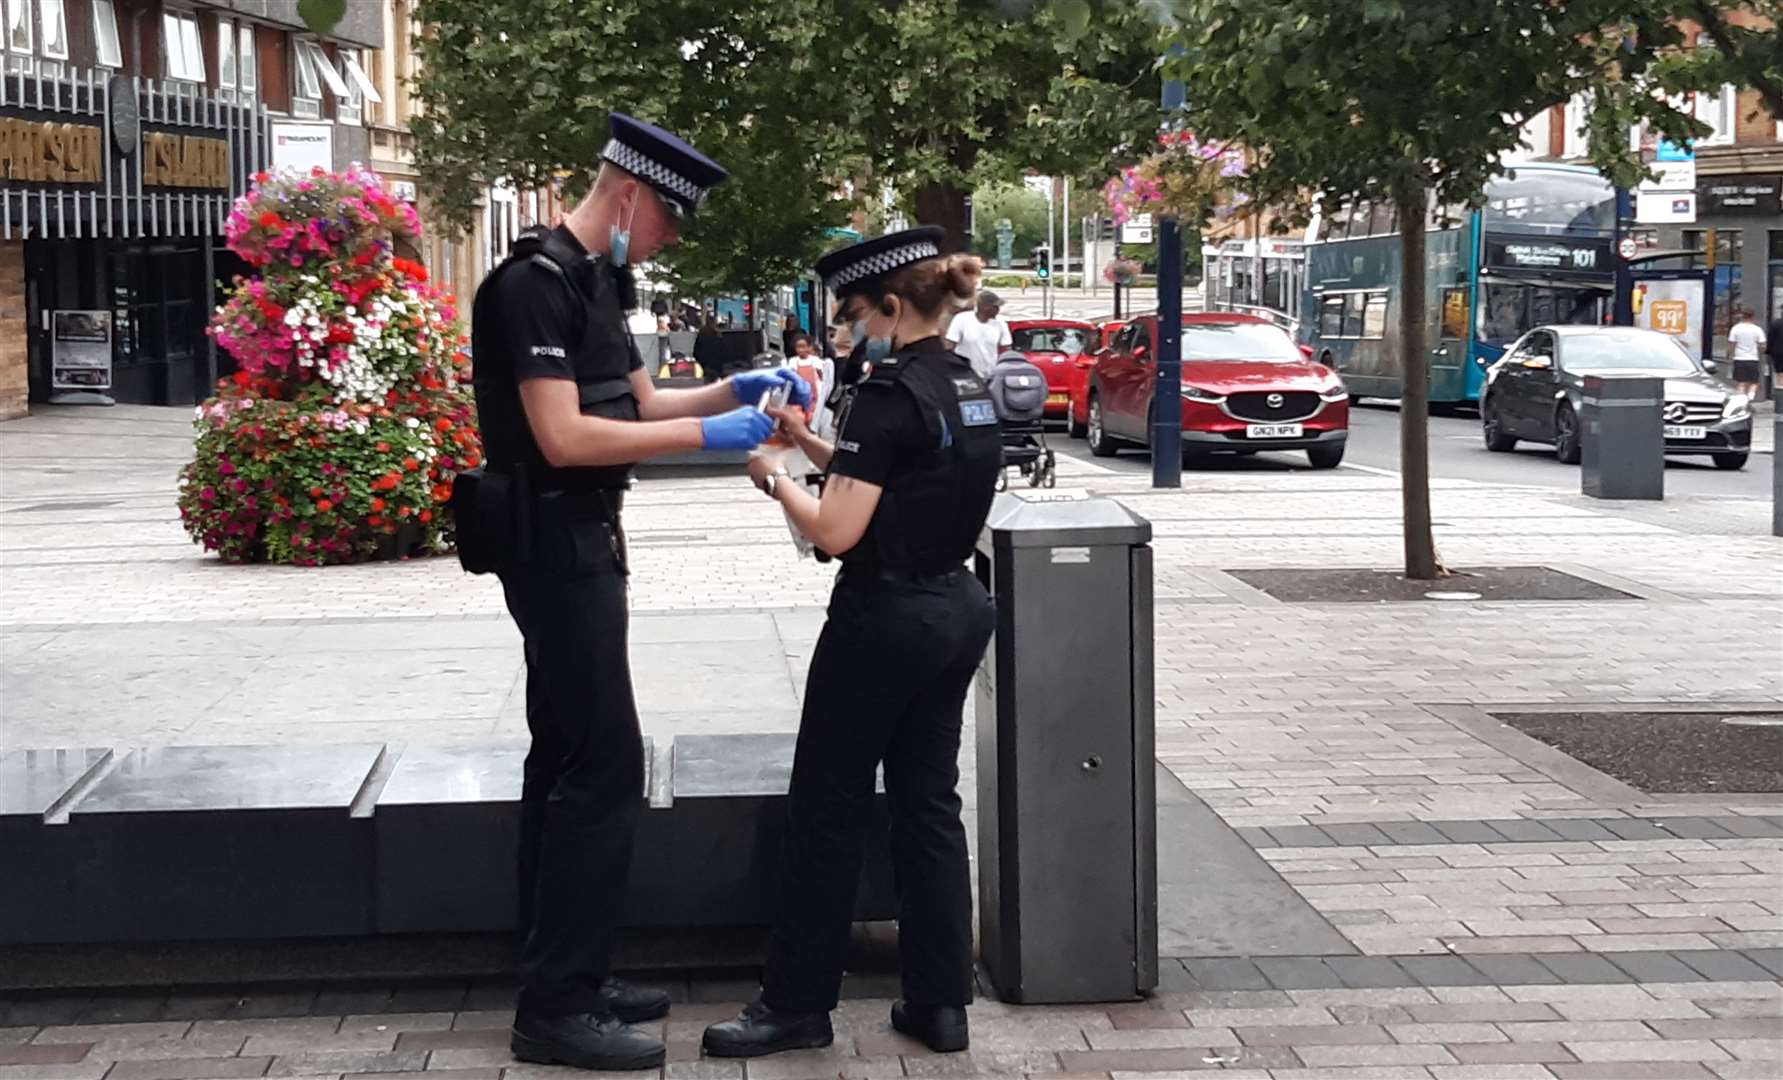 Officers in Lower High Street (Remembrance Square), Maidstone on Thursday, August 26